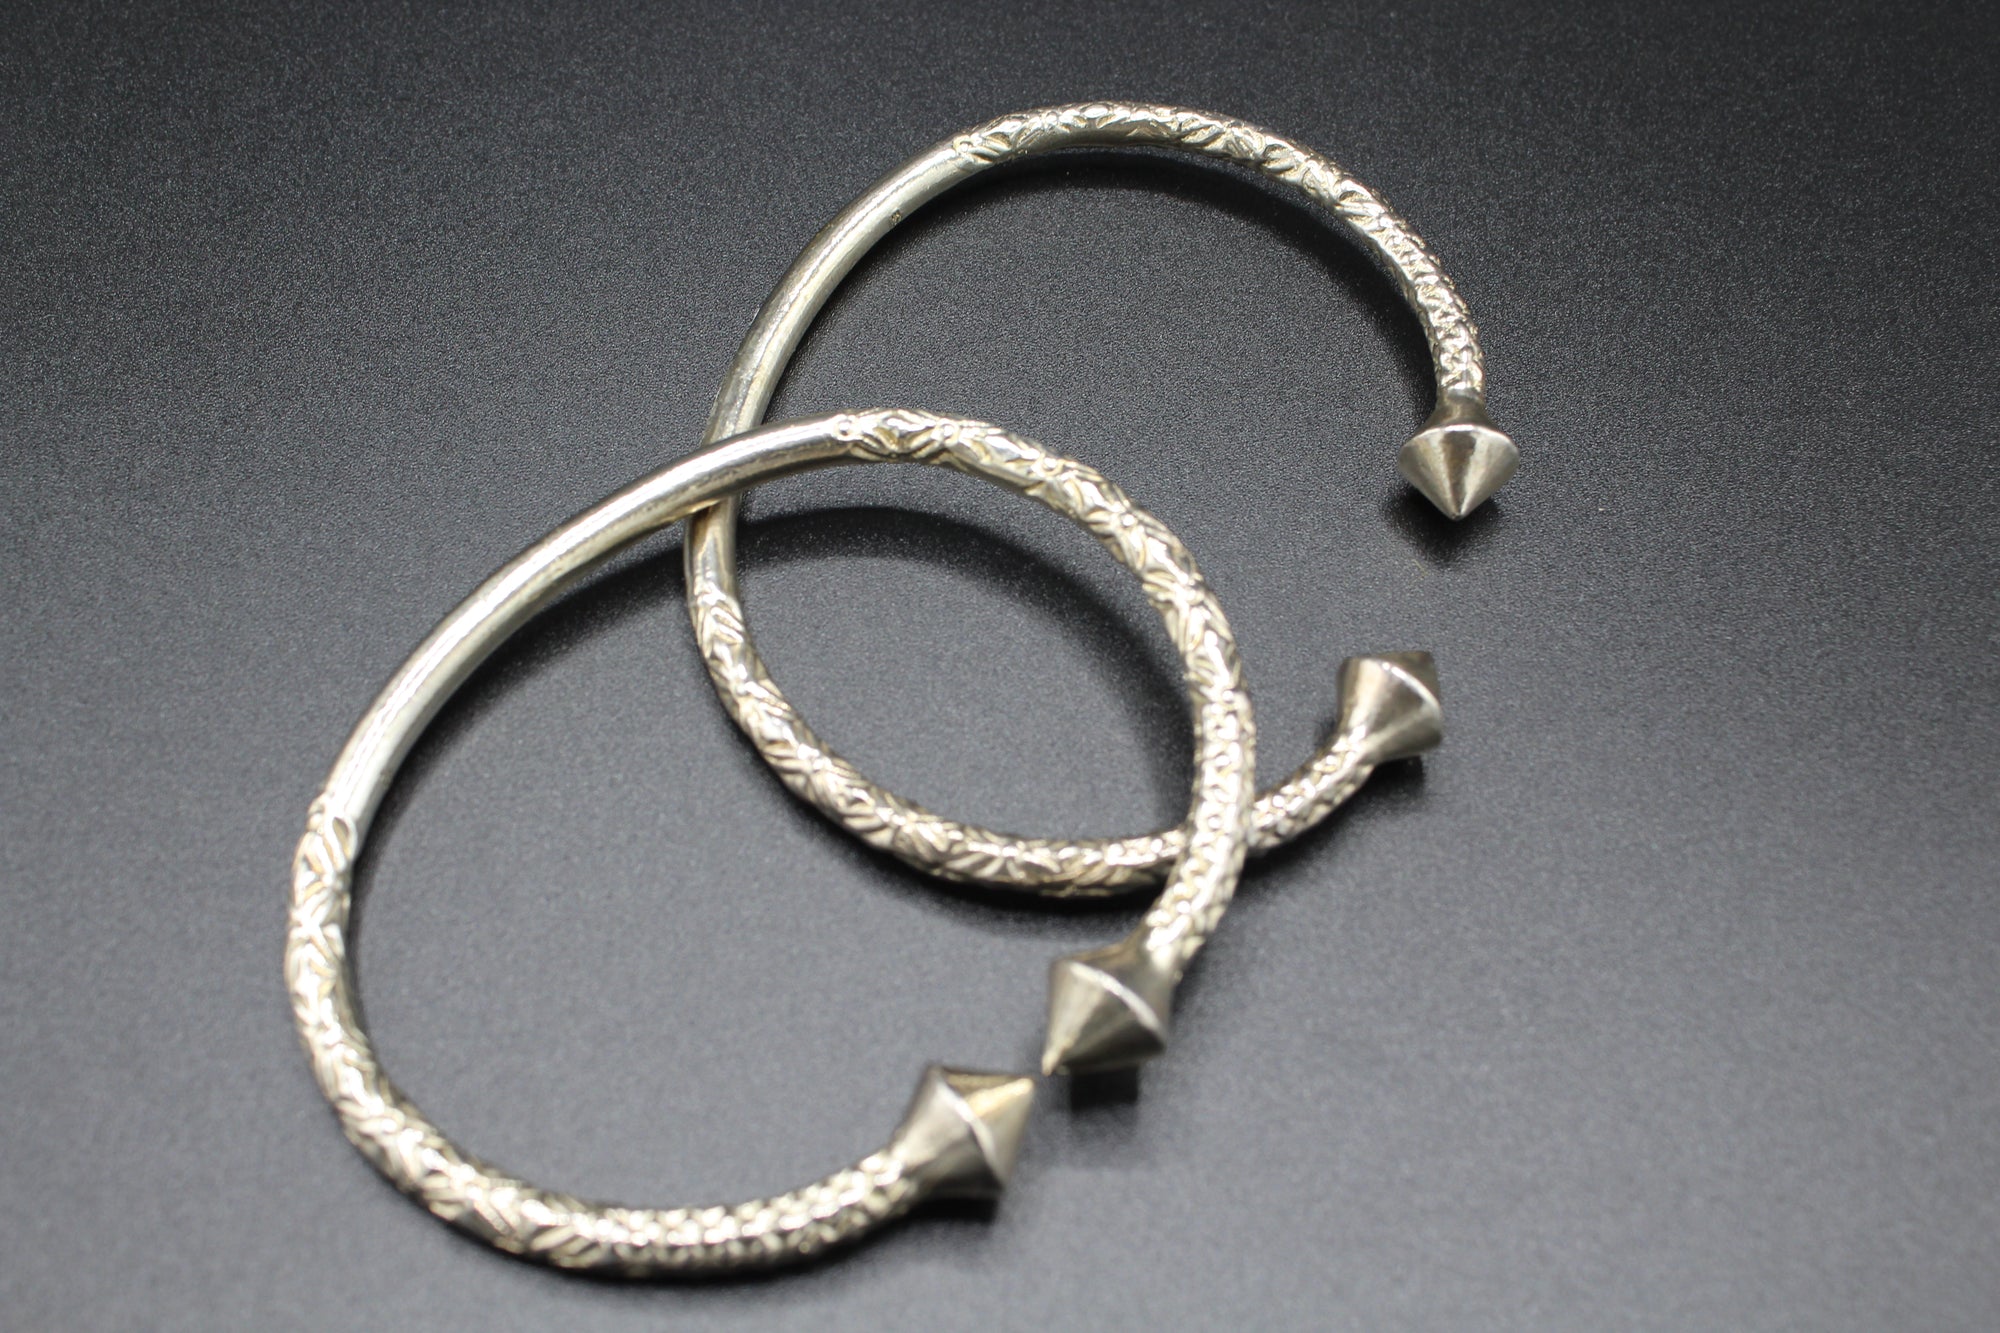 "POINTY BULBS 925 STERLING SILVER BANGLES